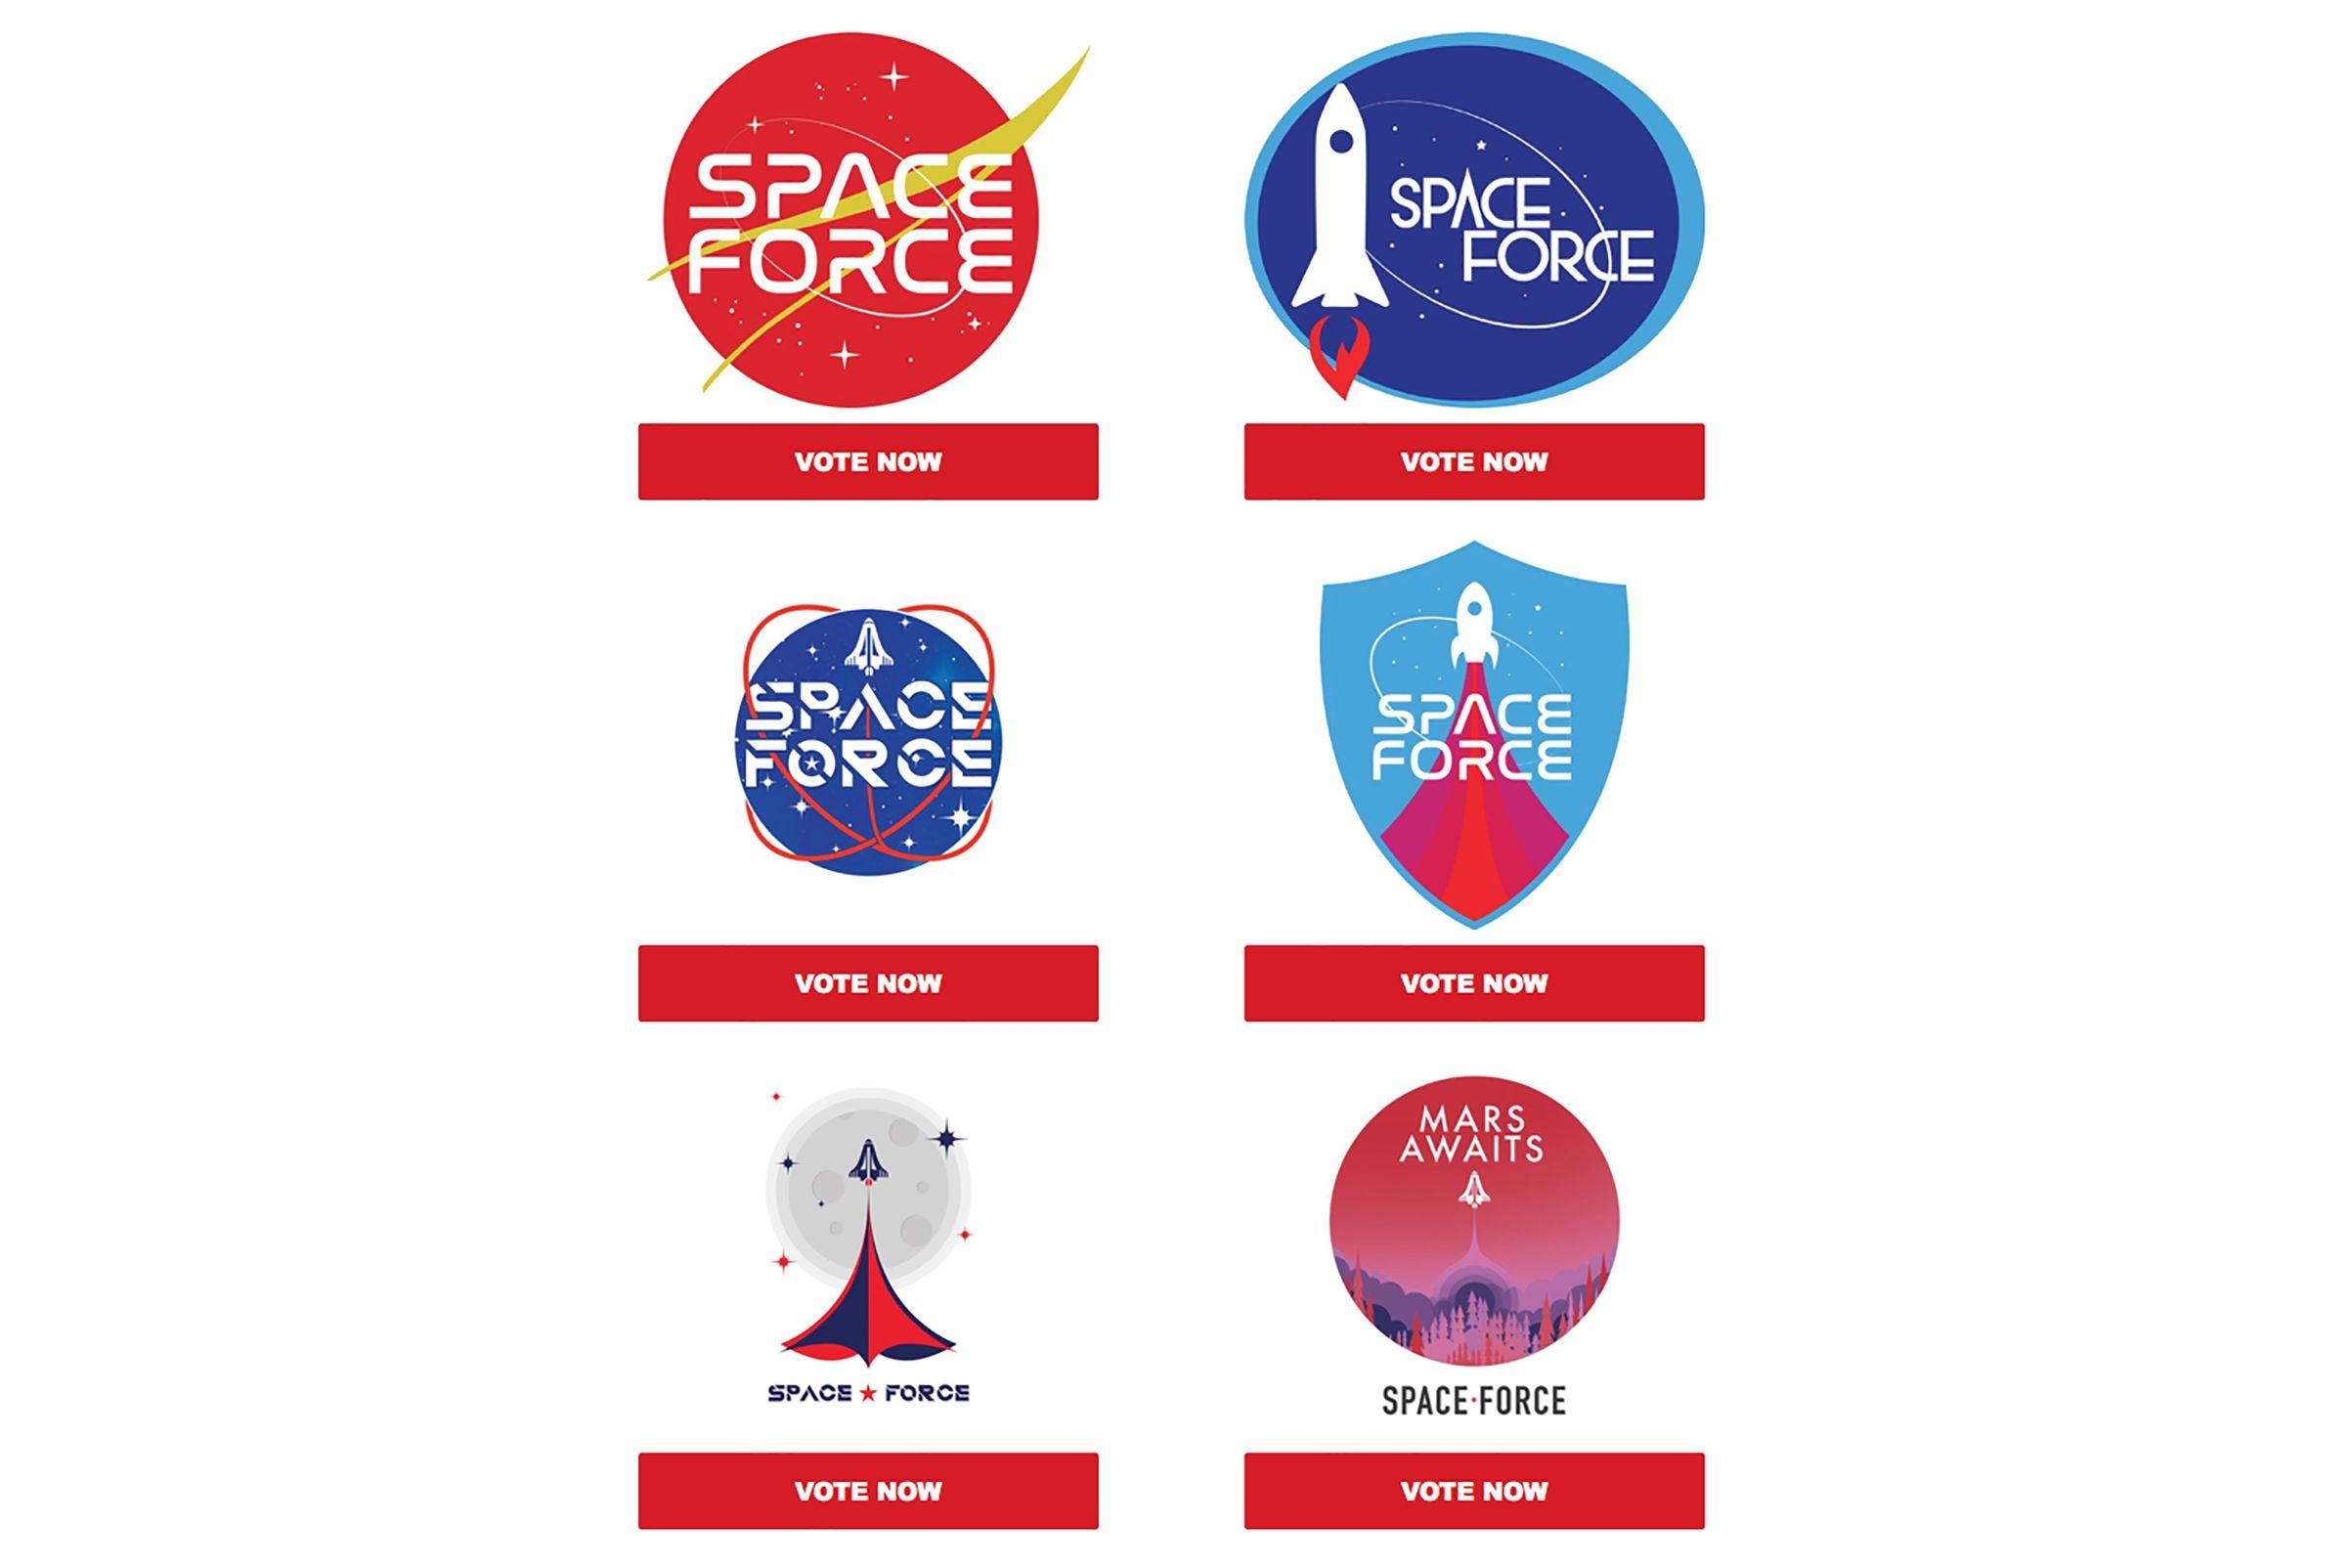 Force Logo - Trump Campaign Asks Supporters to Vote for Space Force Logo | Time